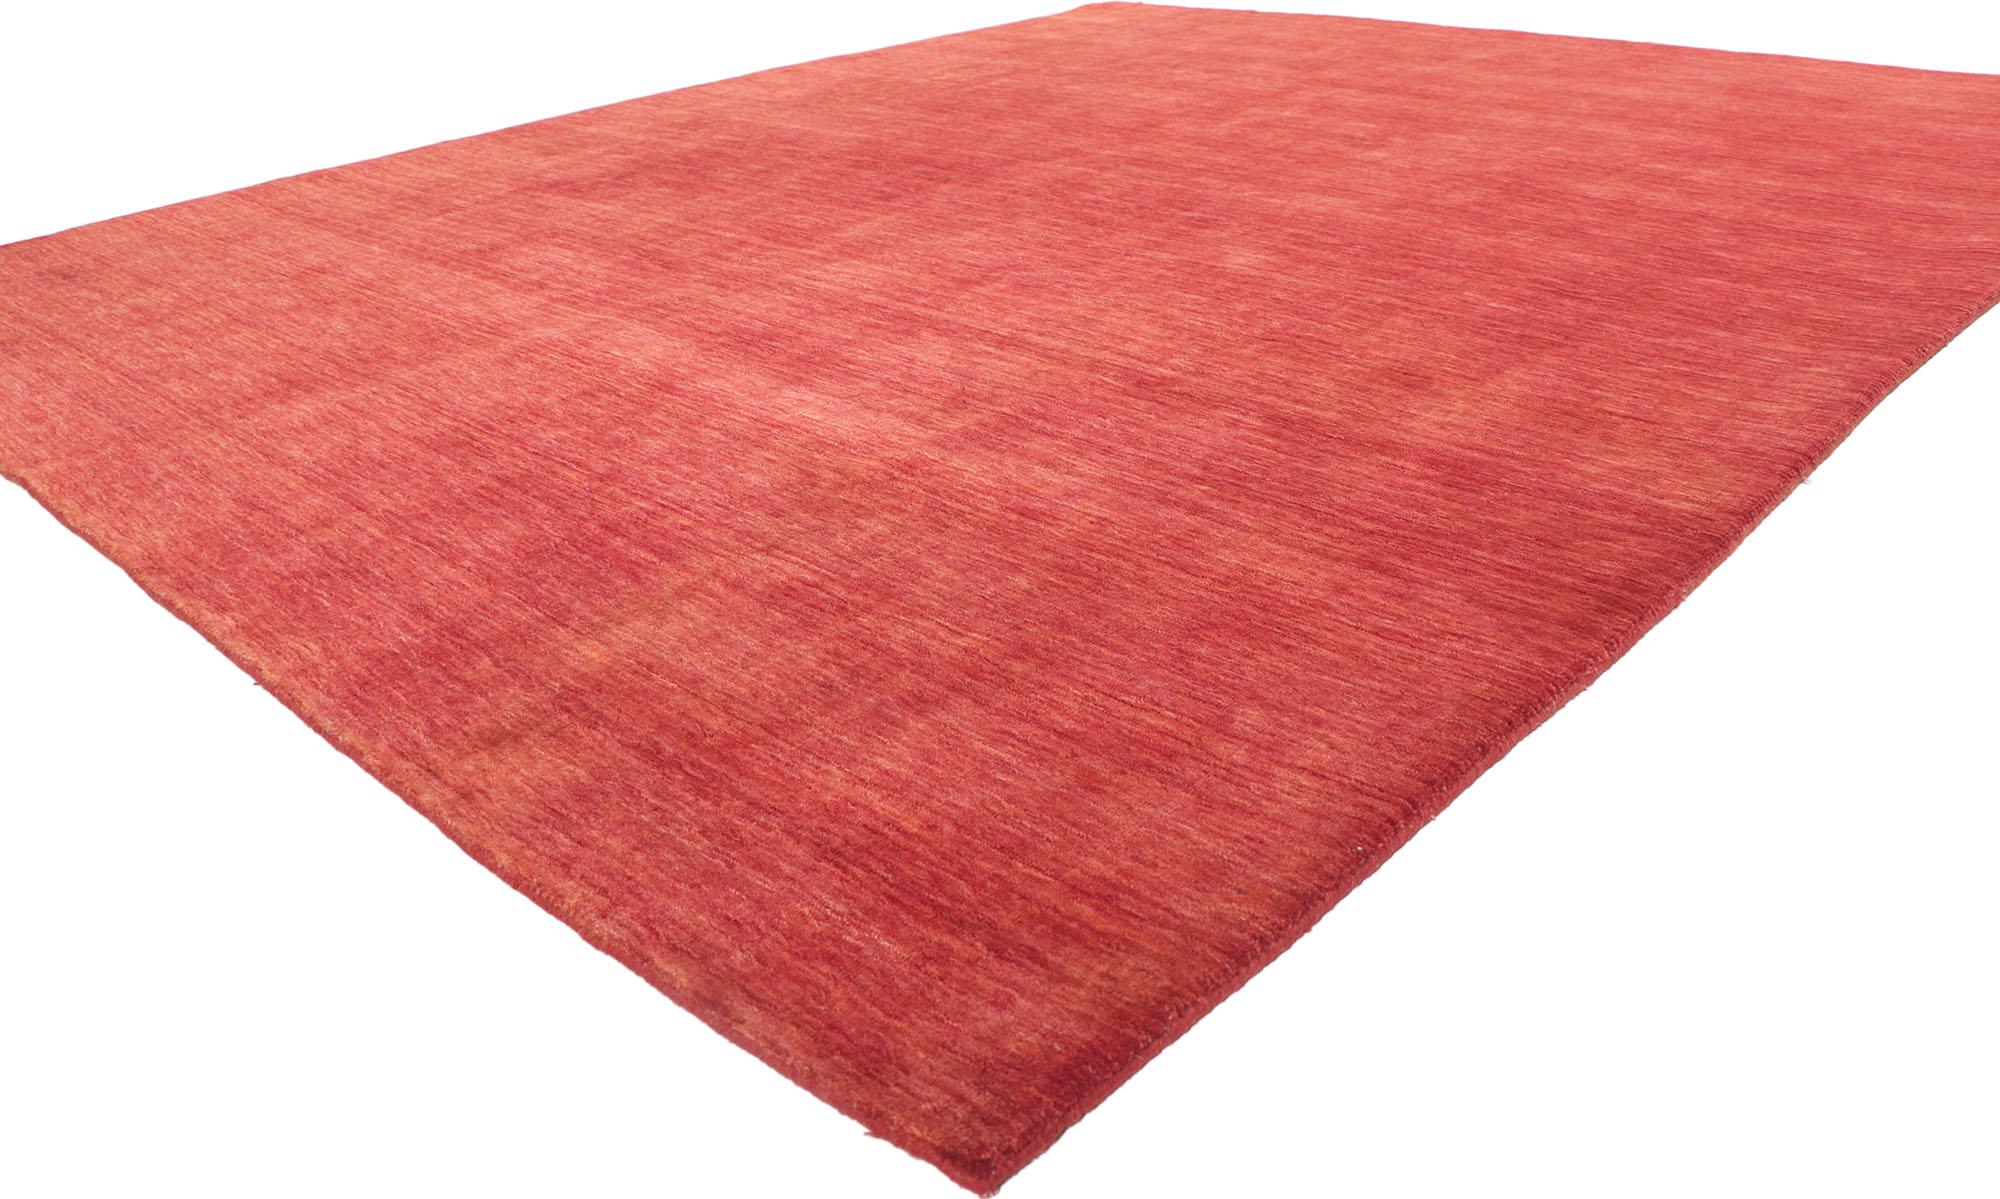 30727 New Contemporary Red Area Rug with Modern Style 08'03 x 10'00. Effortless, elegant, and casual meets the eye in this contemporary Indian area rug. It features gorgeous red hues and softly gradated striations running selvage to selvage blending